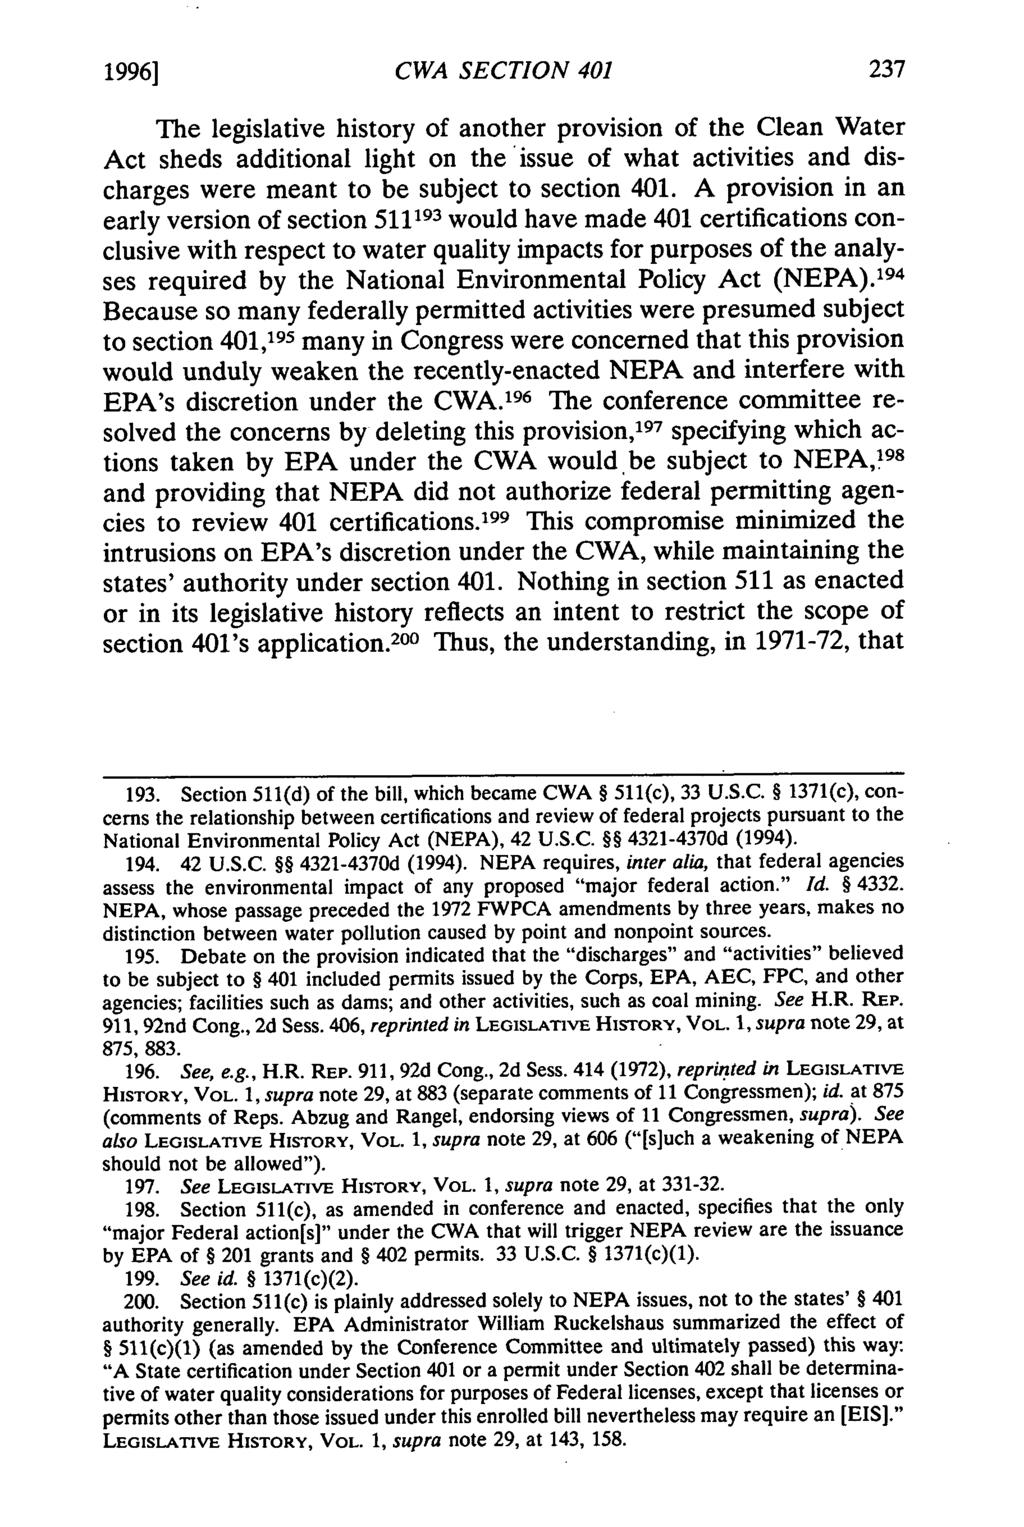 1996] CWA SECTION 401 The legislative history of another provision of the Clean Water Act sheds additional light on the issue of what activities and discharges were meant to be subject to section 401.